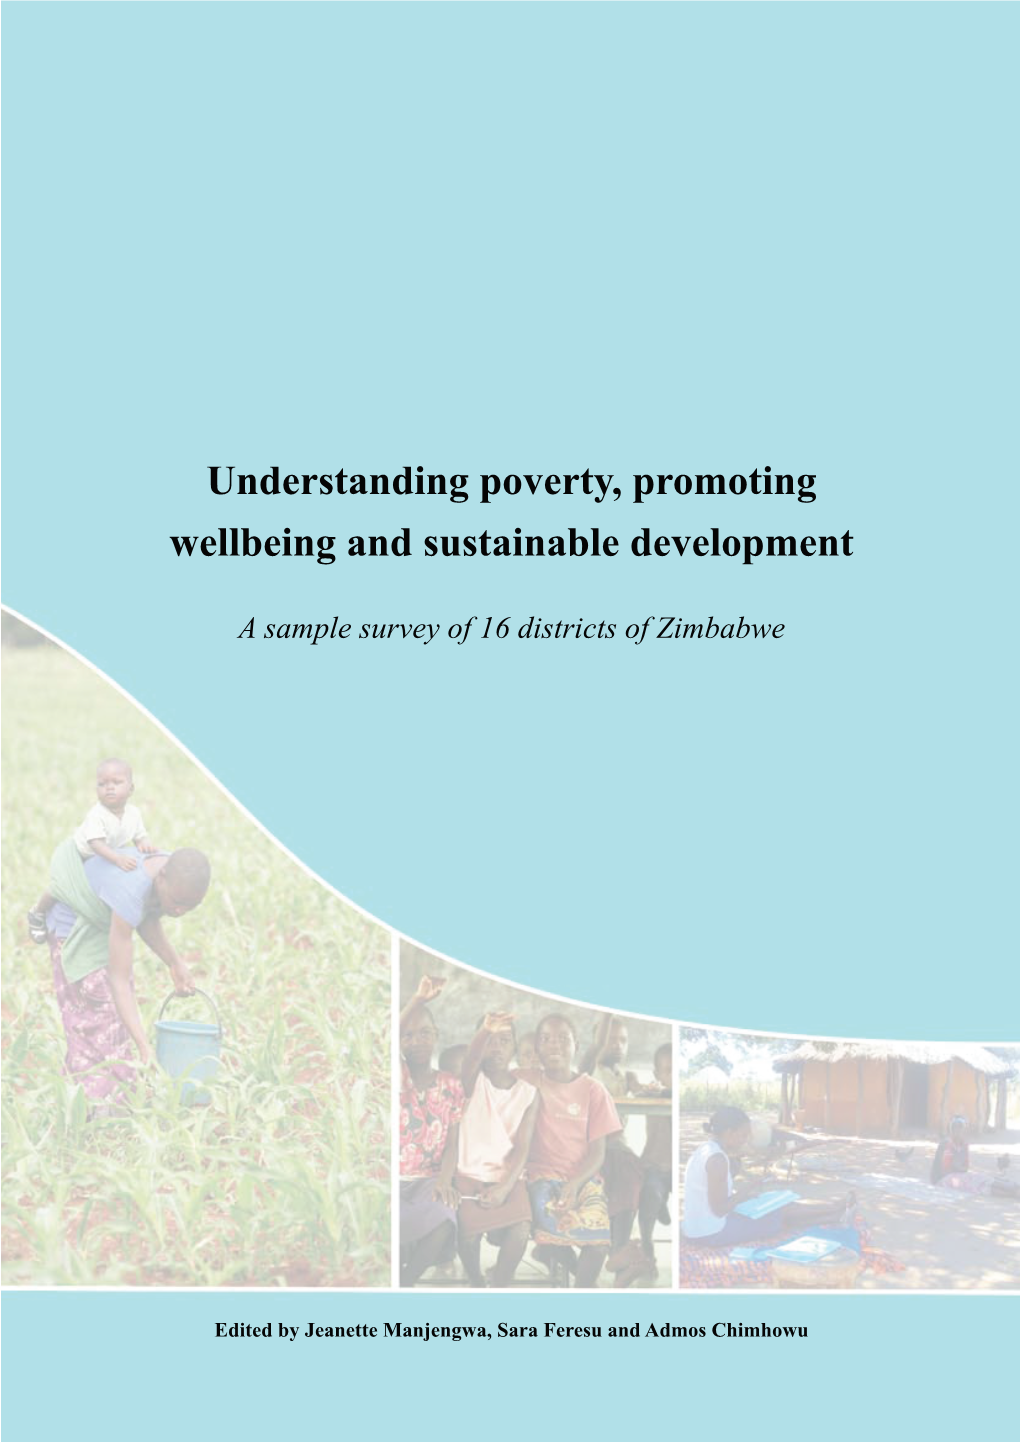 Understanding Poverty, Promoting Wellbeing and Sustainable Development